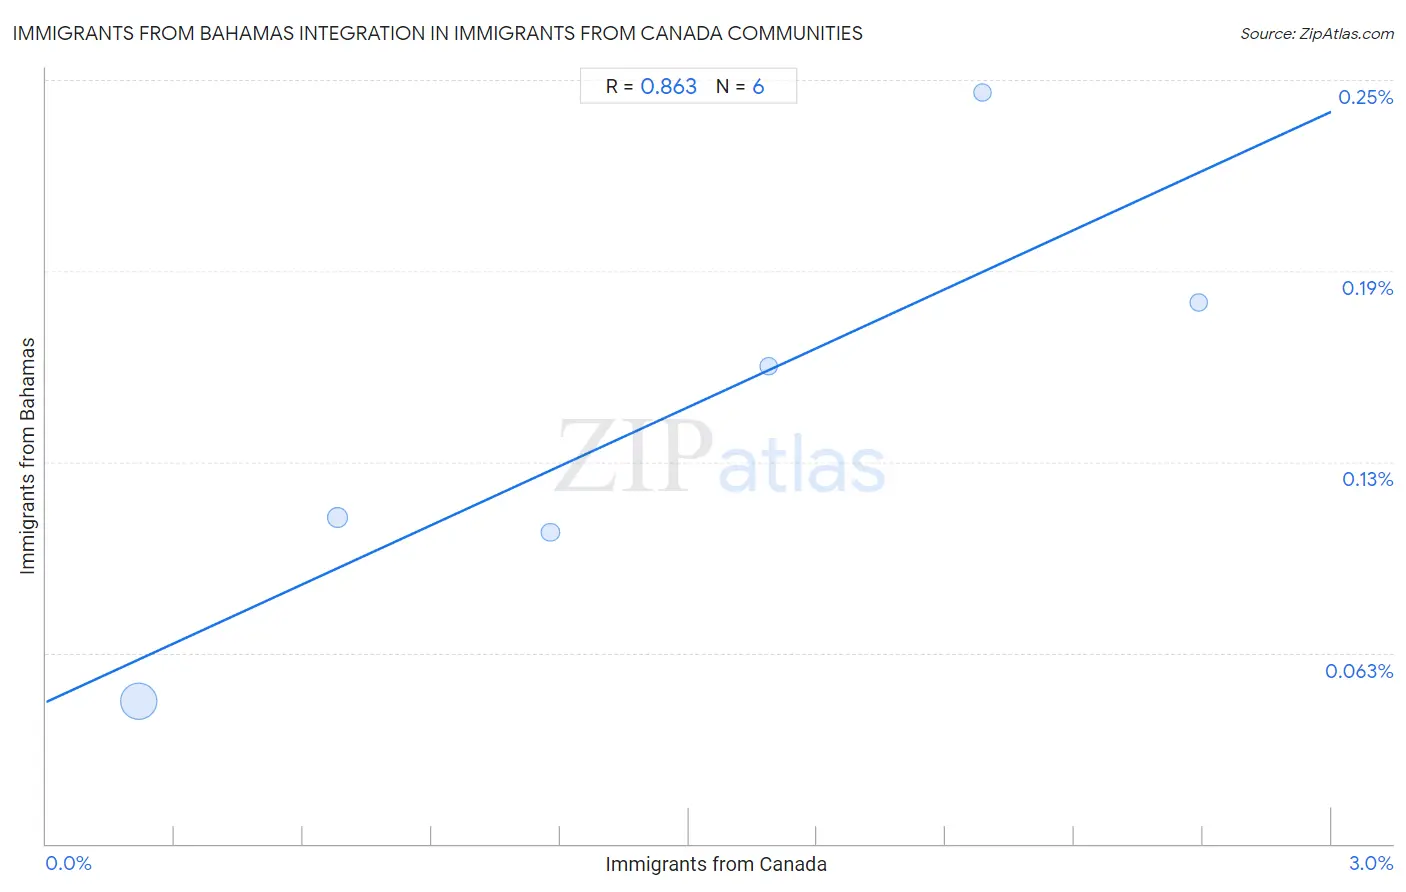 Immigrants from Canada Integration in Immigrants from Bahamas Communities